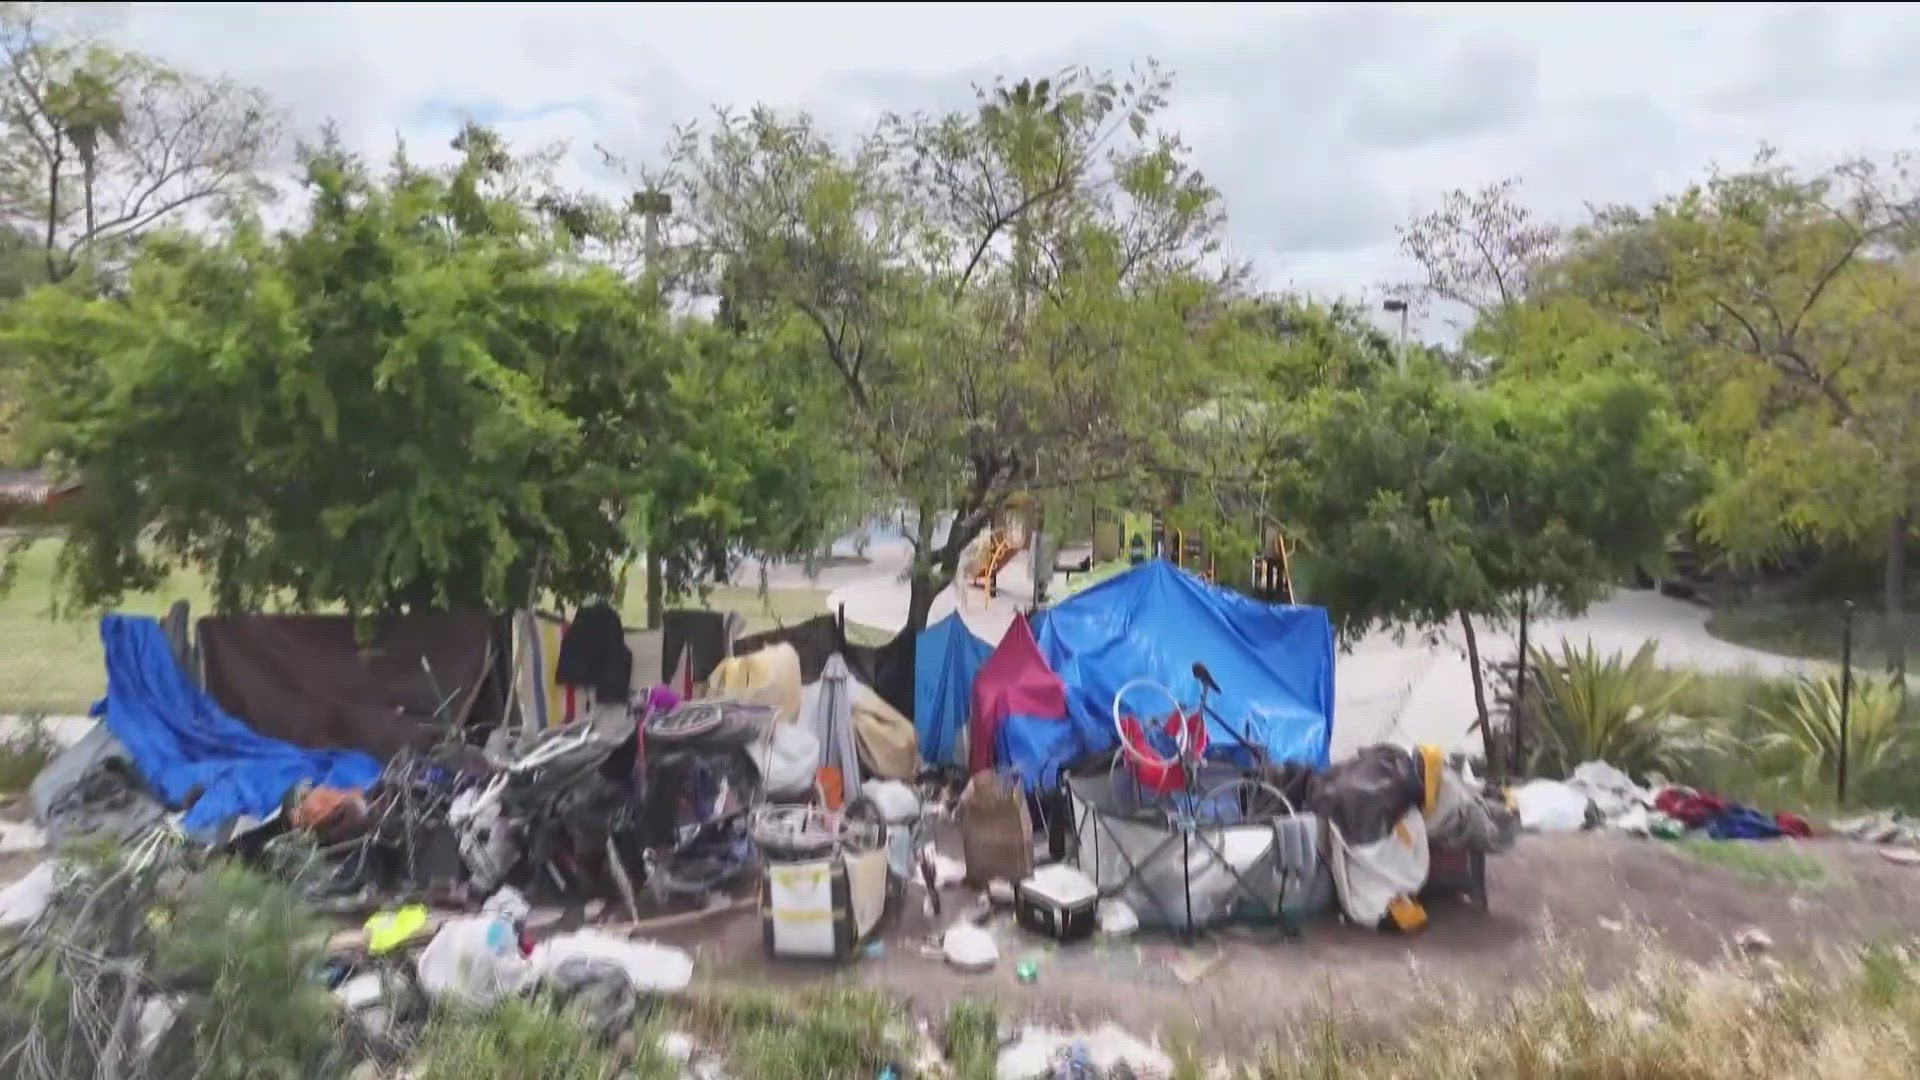 “With homeless camps here and trash and drug dealings, we can’t enjoy this park."